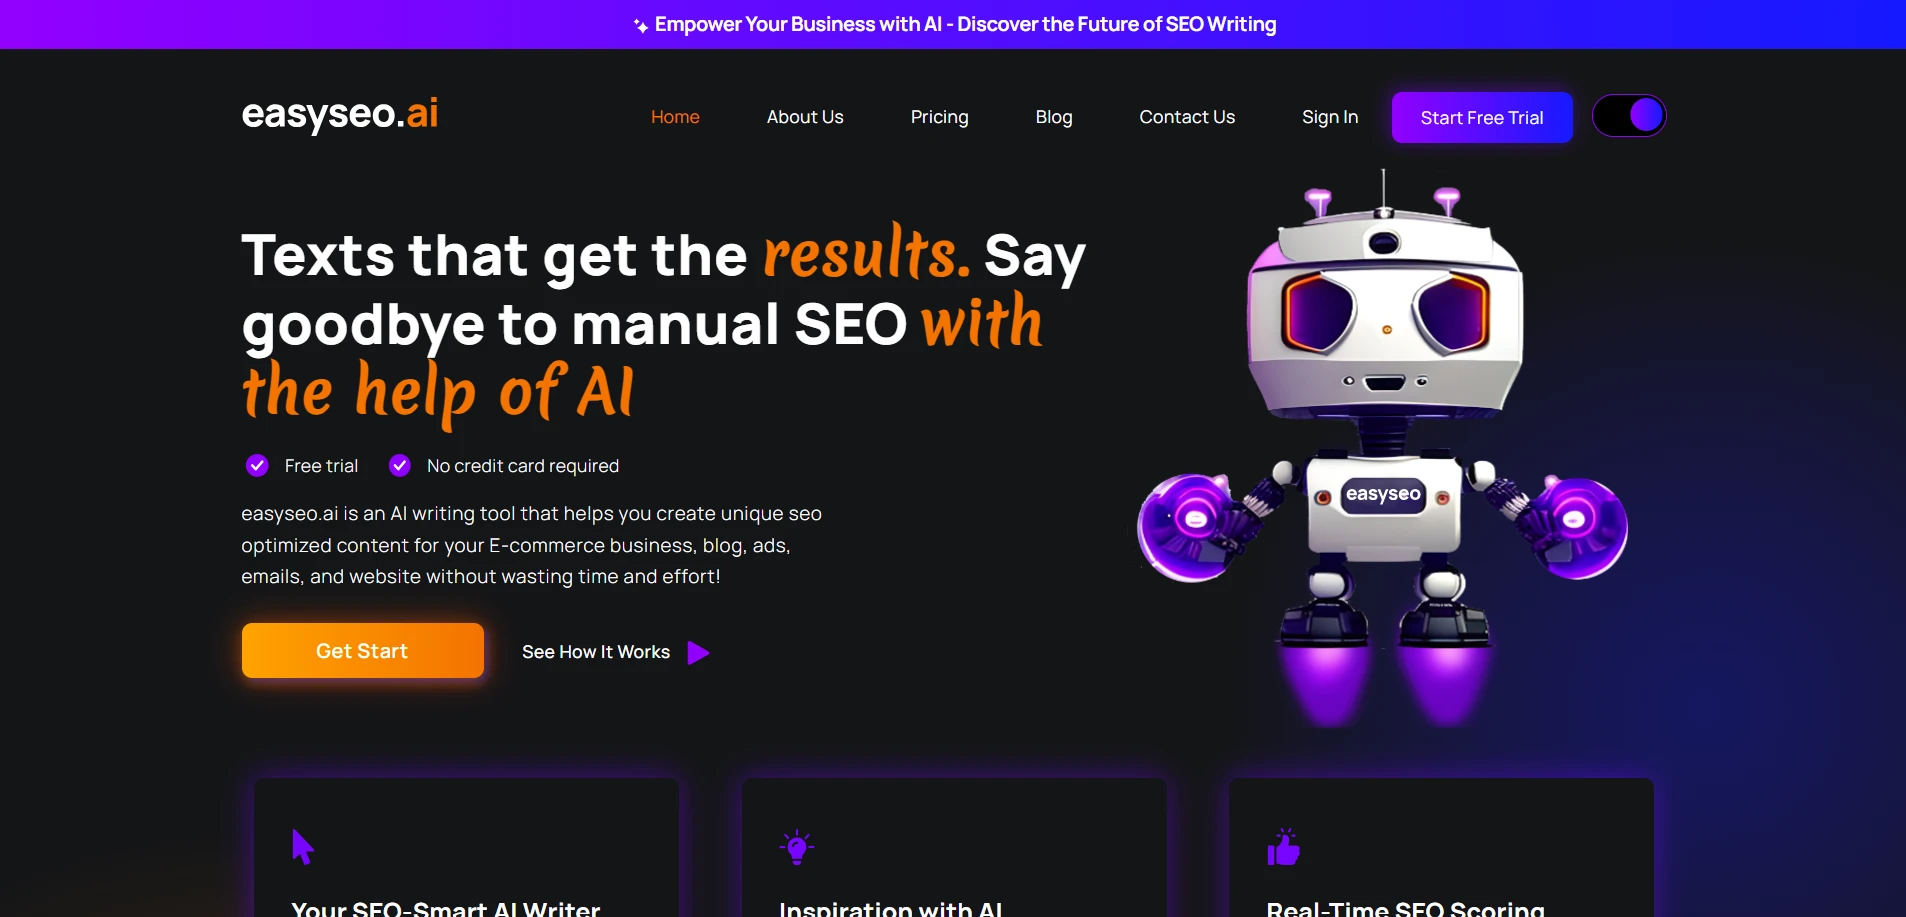 Easyseo.aiwebsite picture